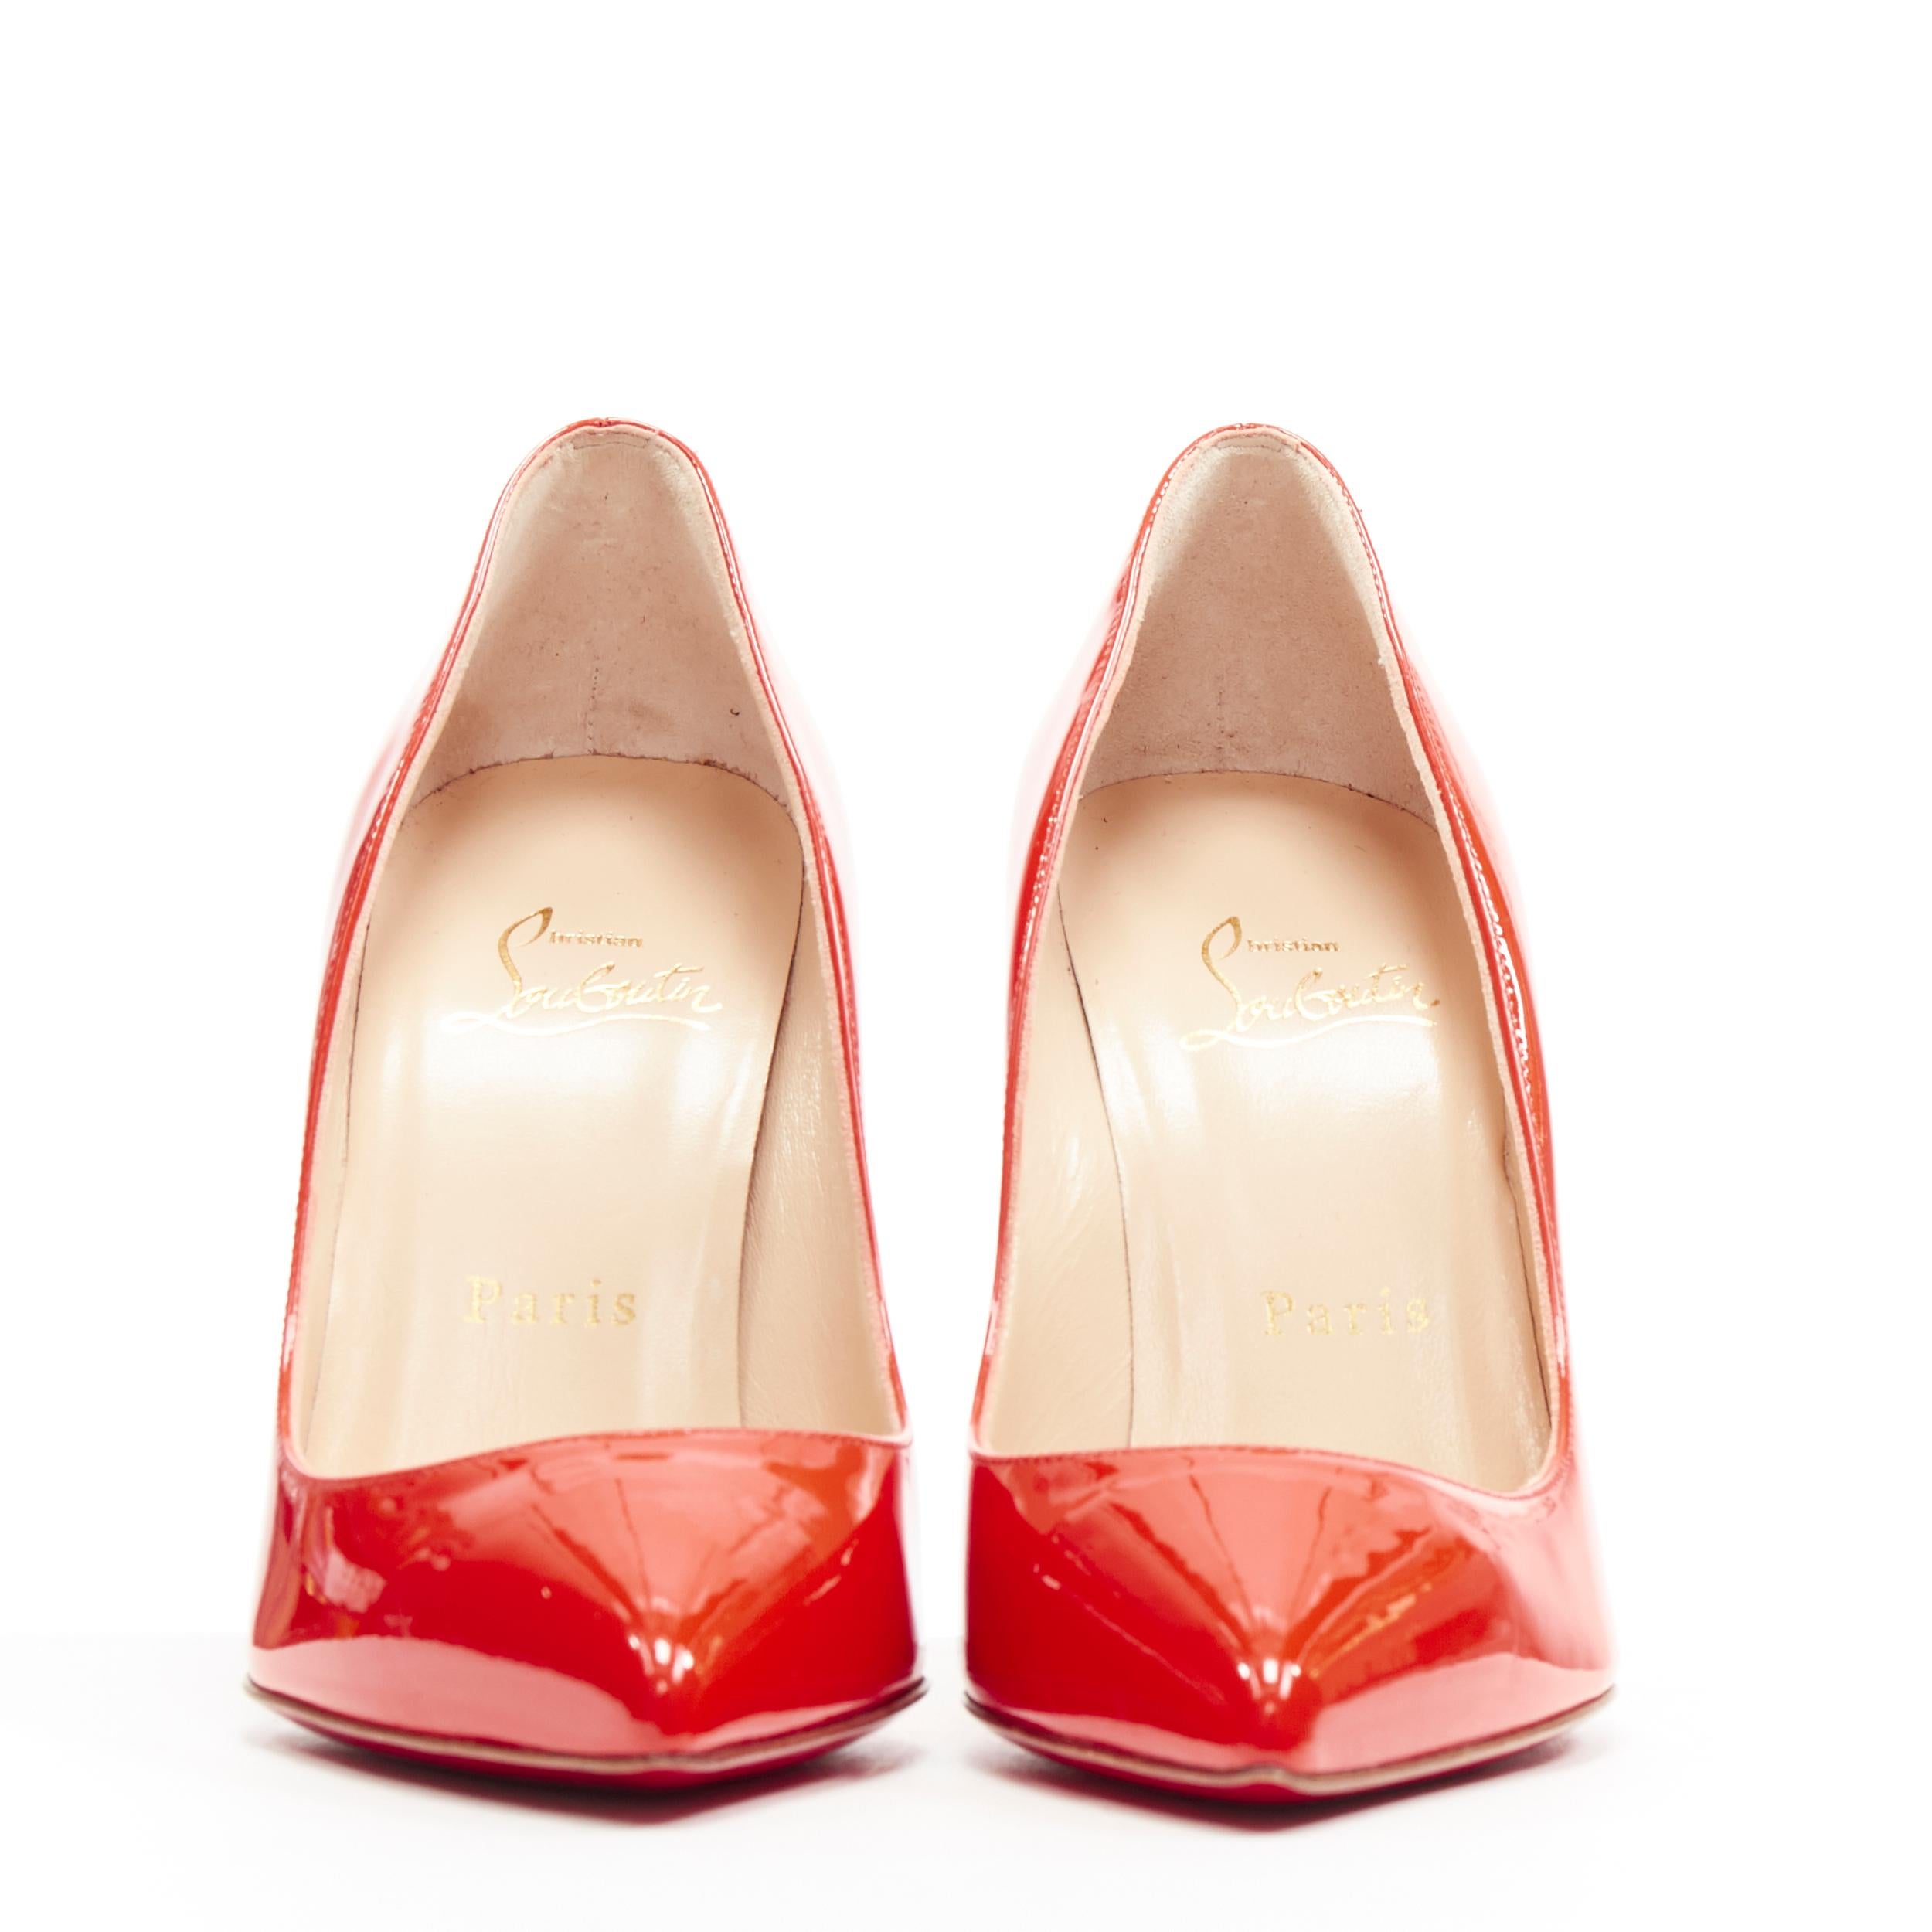 kate patent red sole pumps